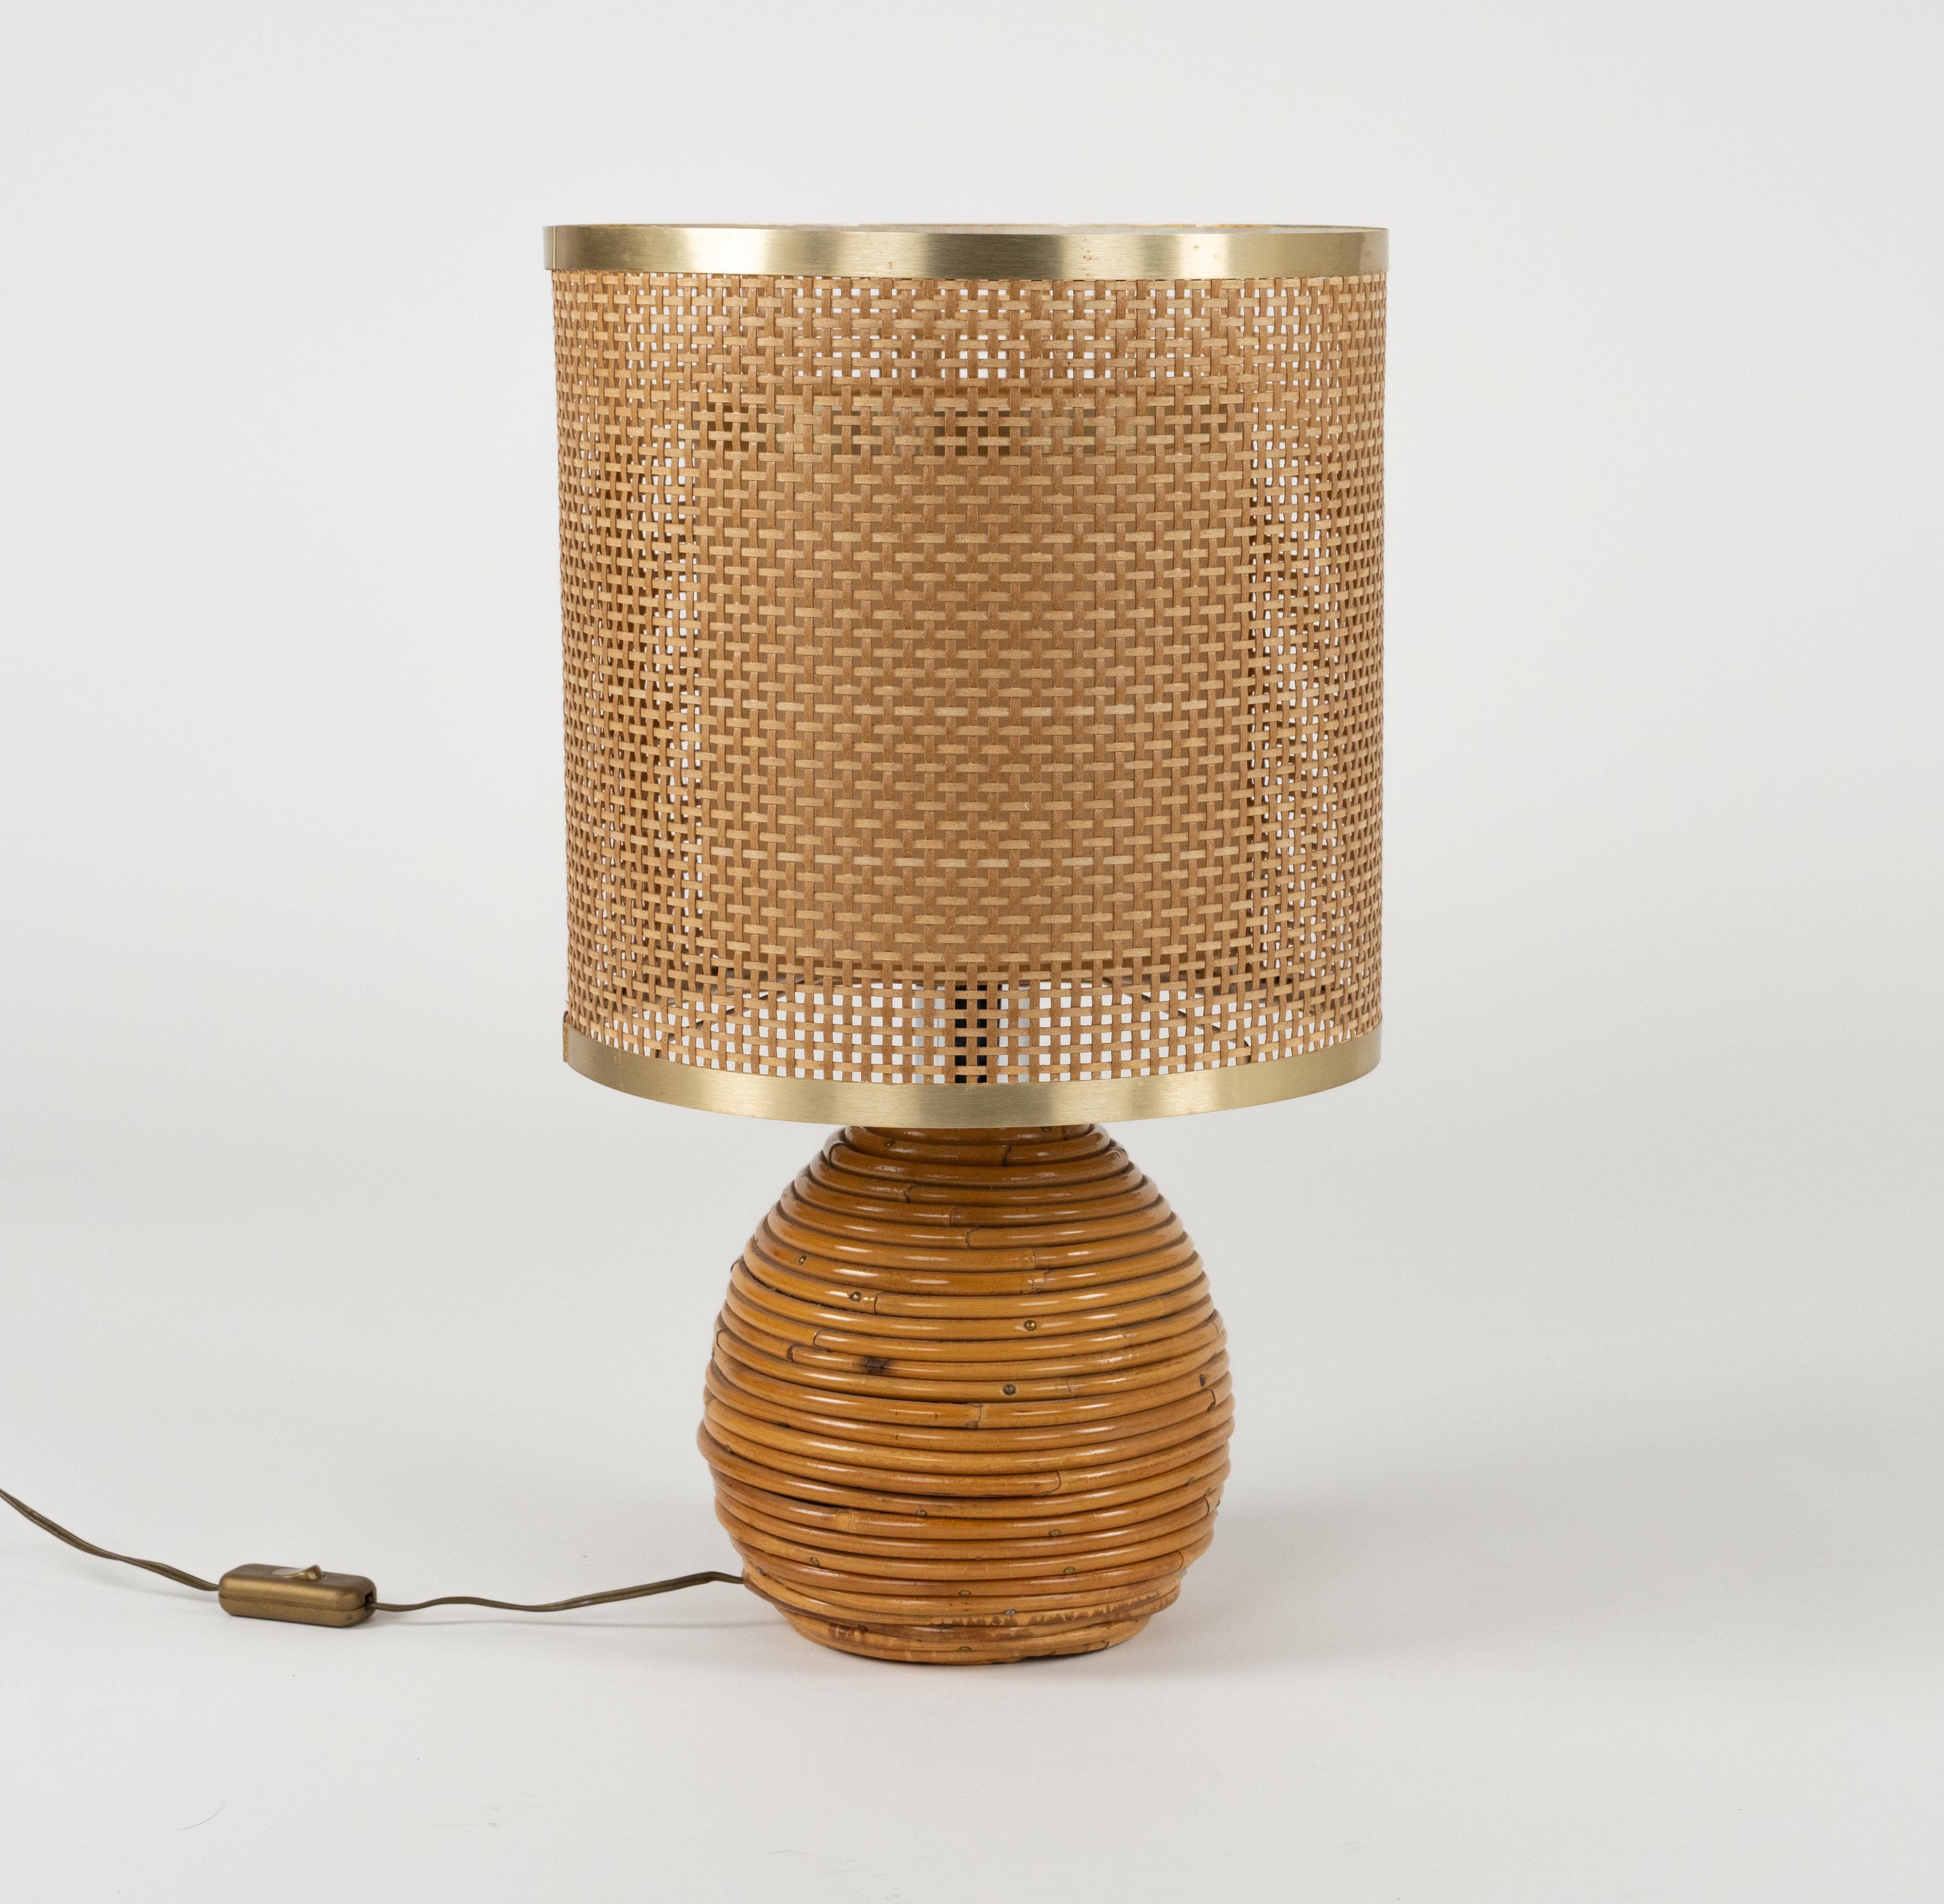 Midcentury Rattan, Wicker and Chrome Table Lamp by Vivai Del Sud, Italy 1970s For Sale 1